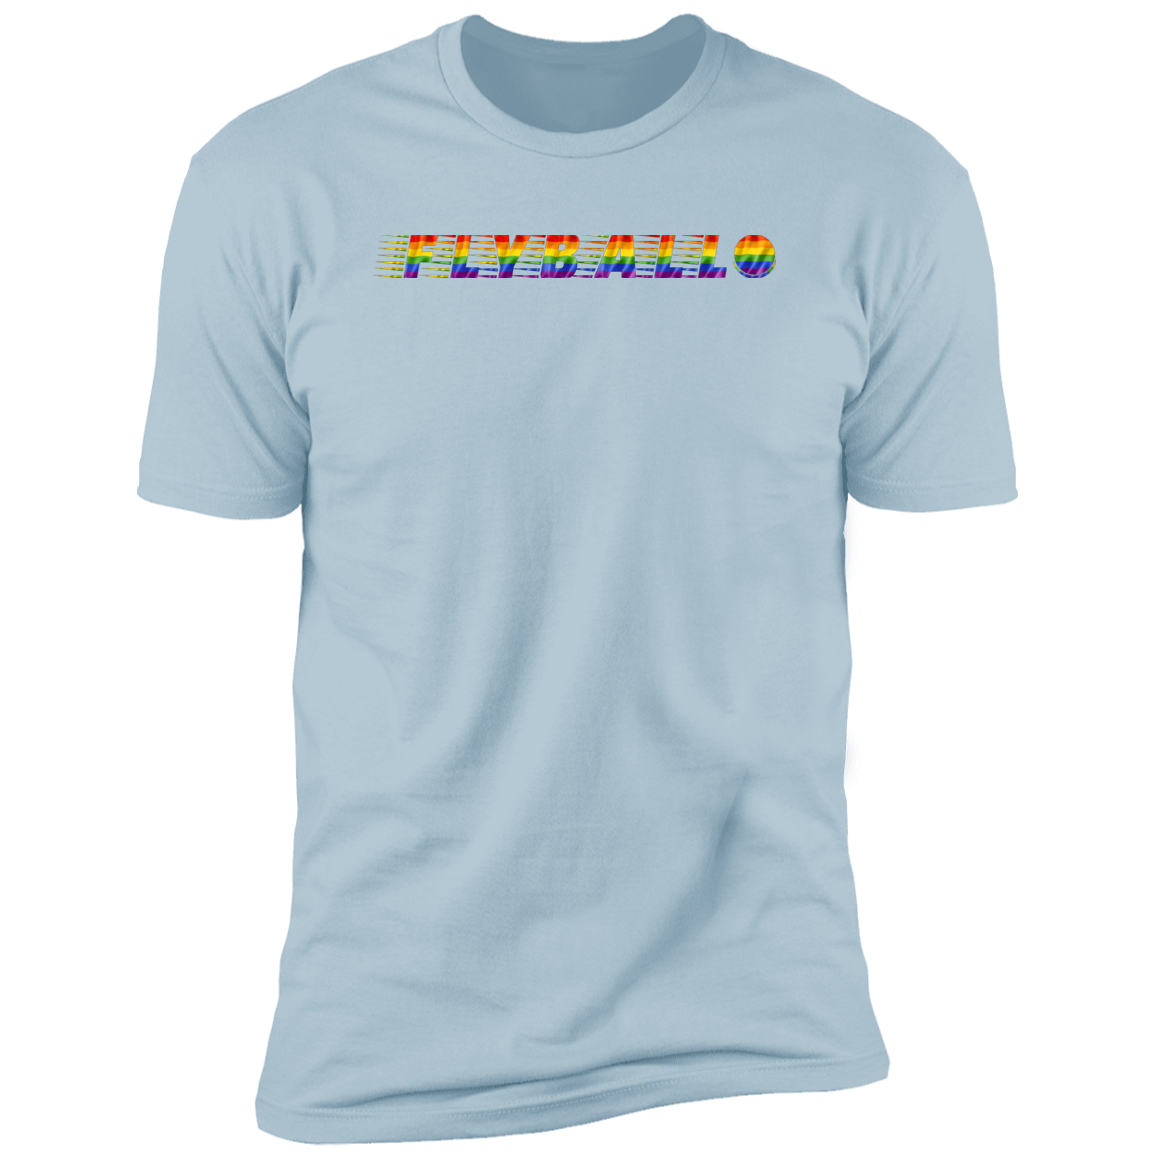 Flyball pride t-shirt, dog pride dog flyball shirt for humans, in light blue